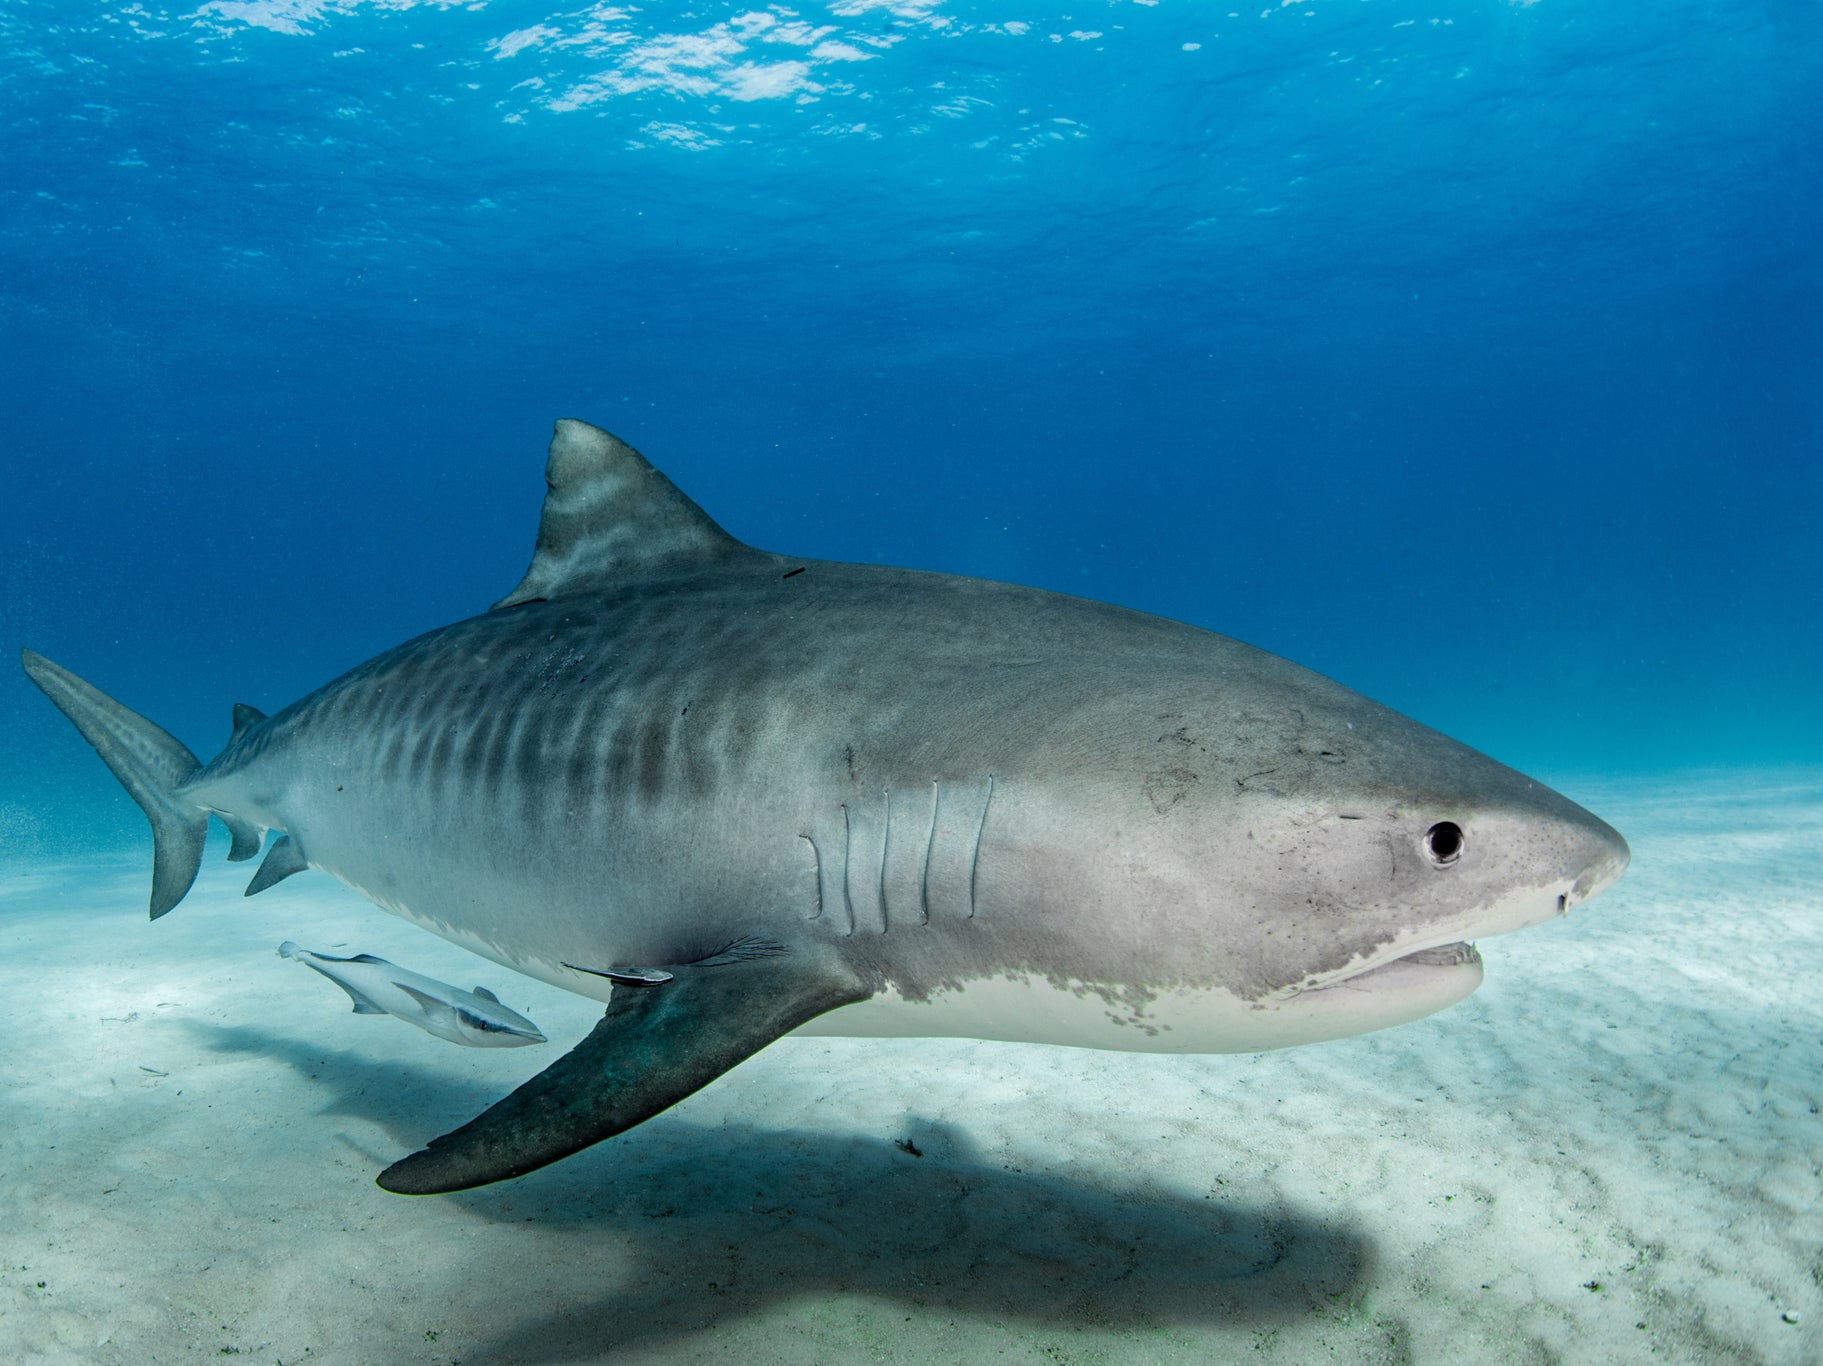 ‘Alarmingly high’ levels of toxic metals have been found in sharks in the Bahamas, research has found